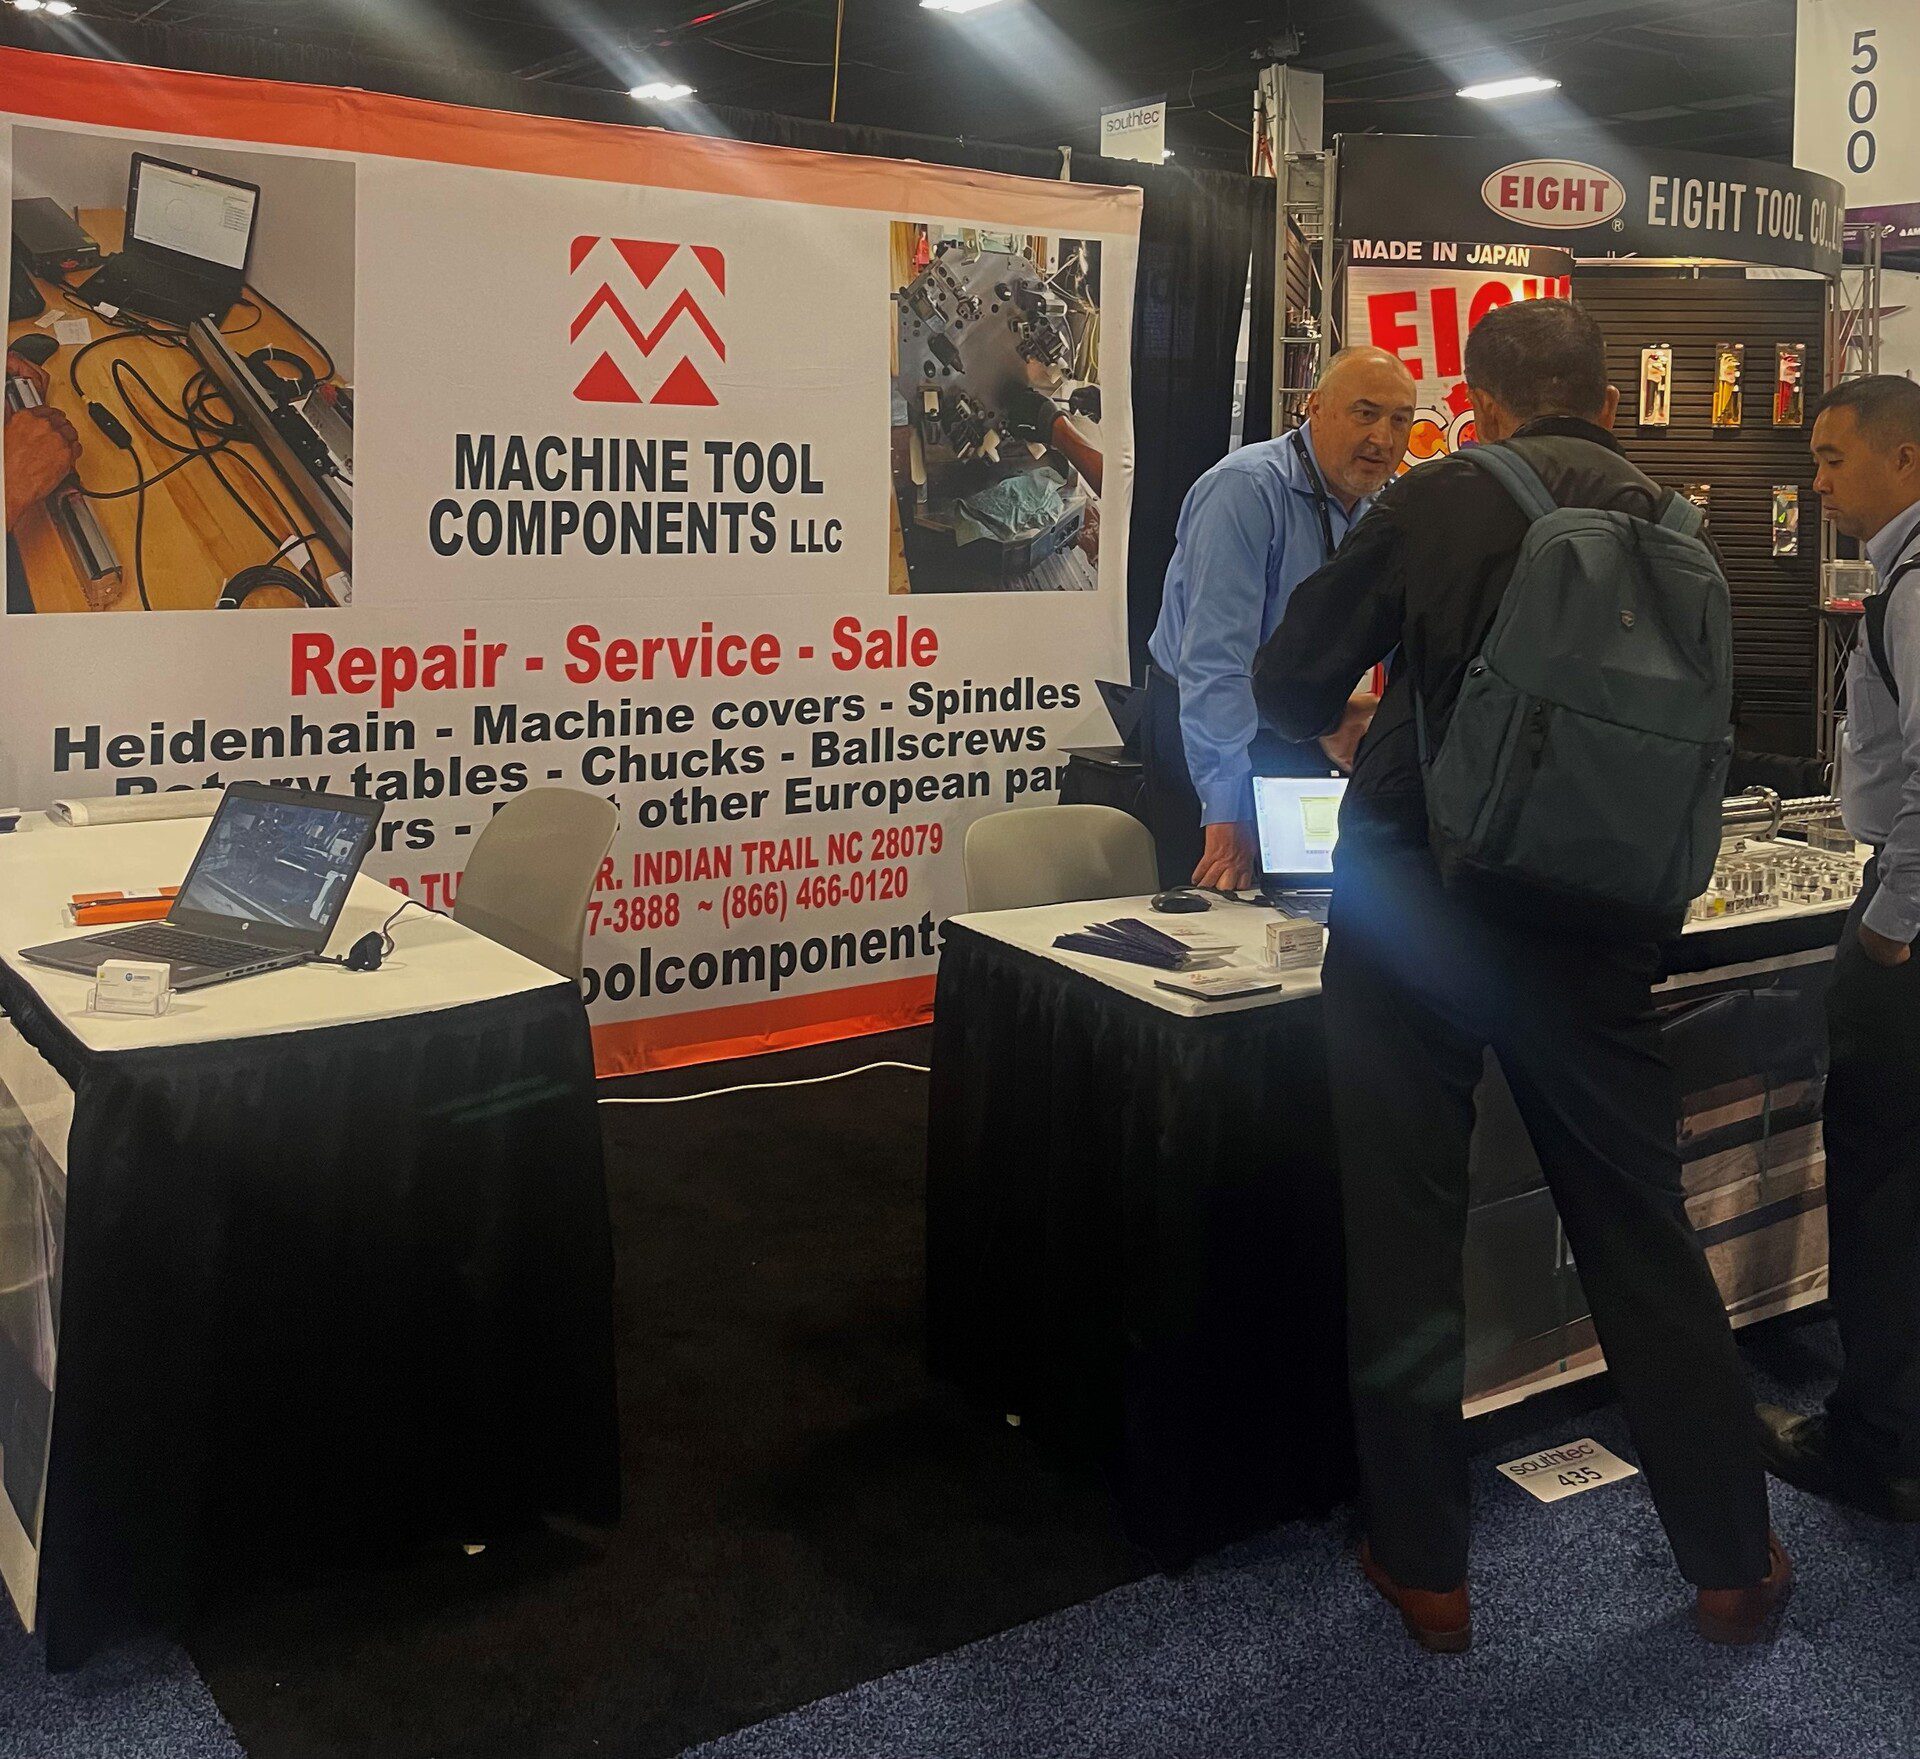 Machine Tool Promotional Booth